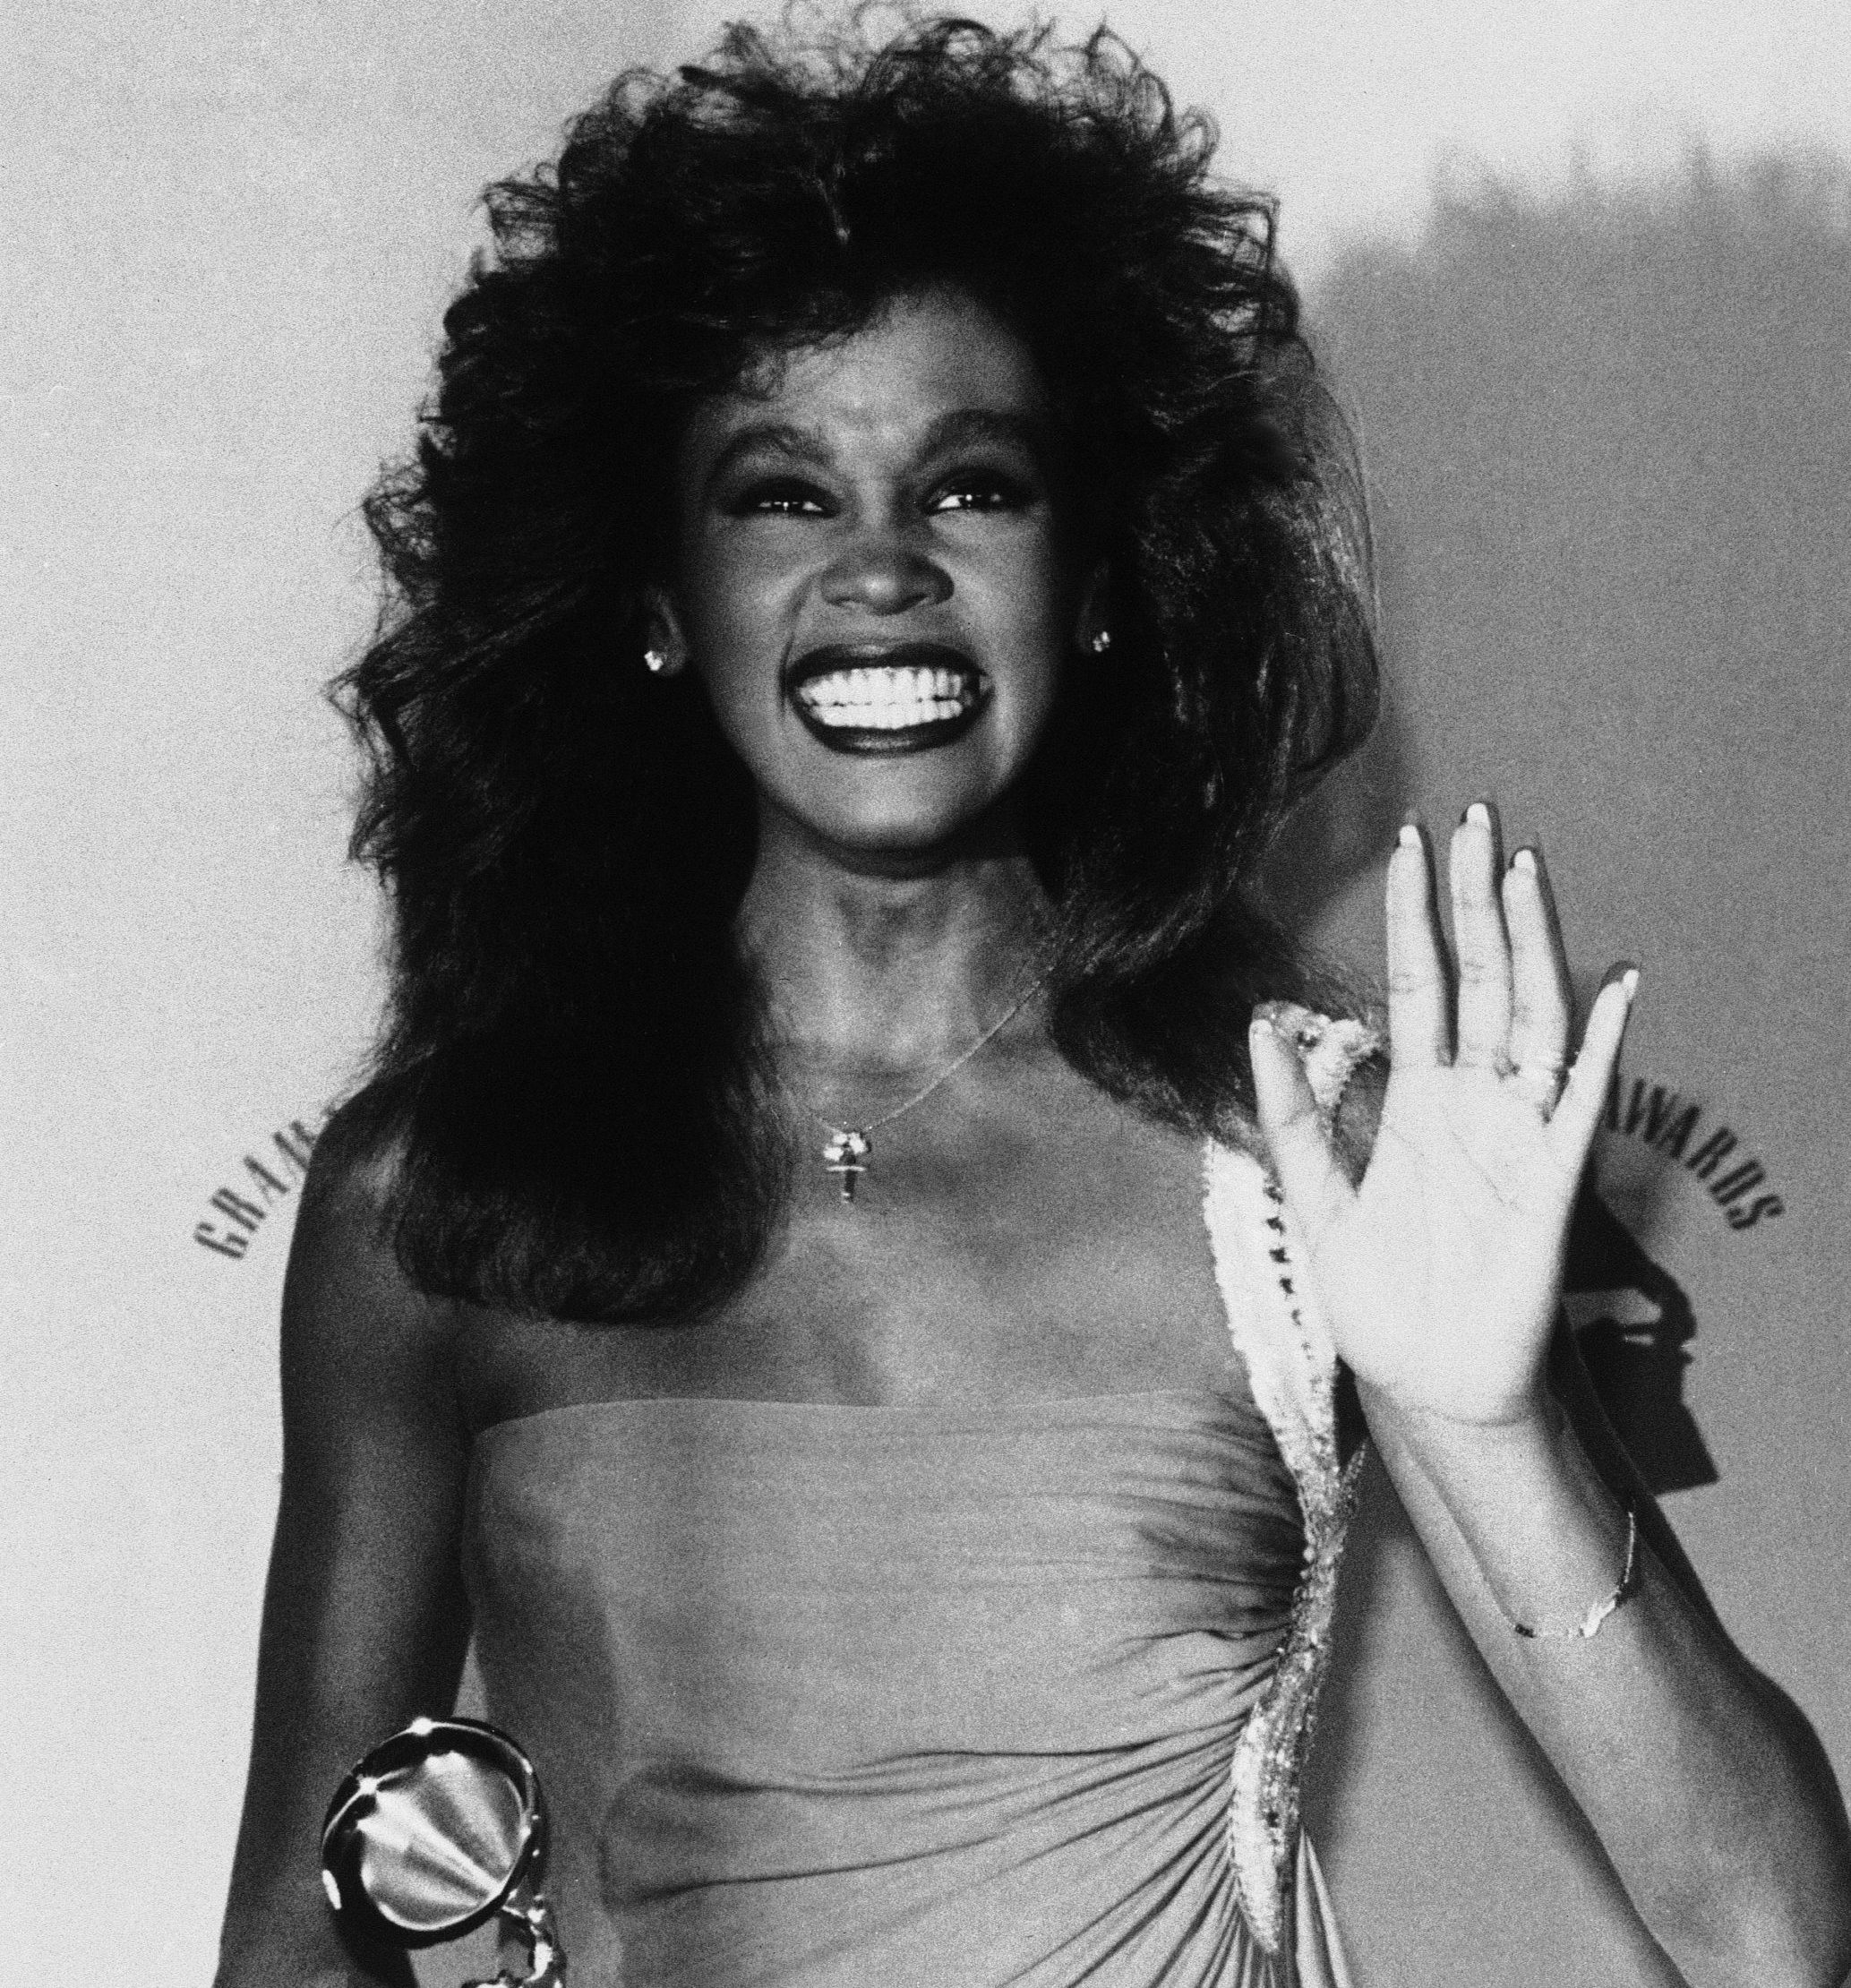 The legendary Whitney Houston was born on this day in 1963